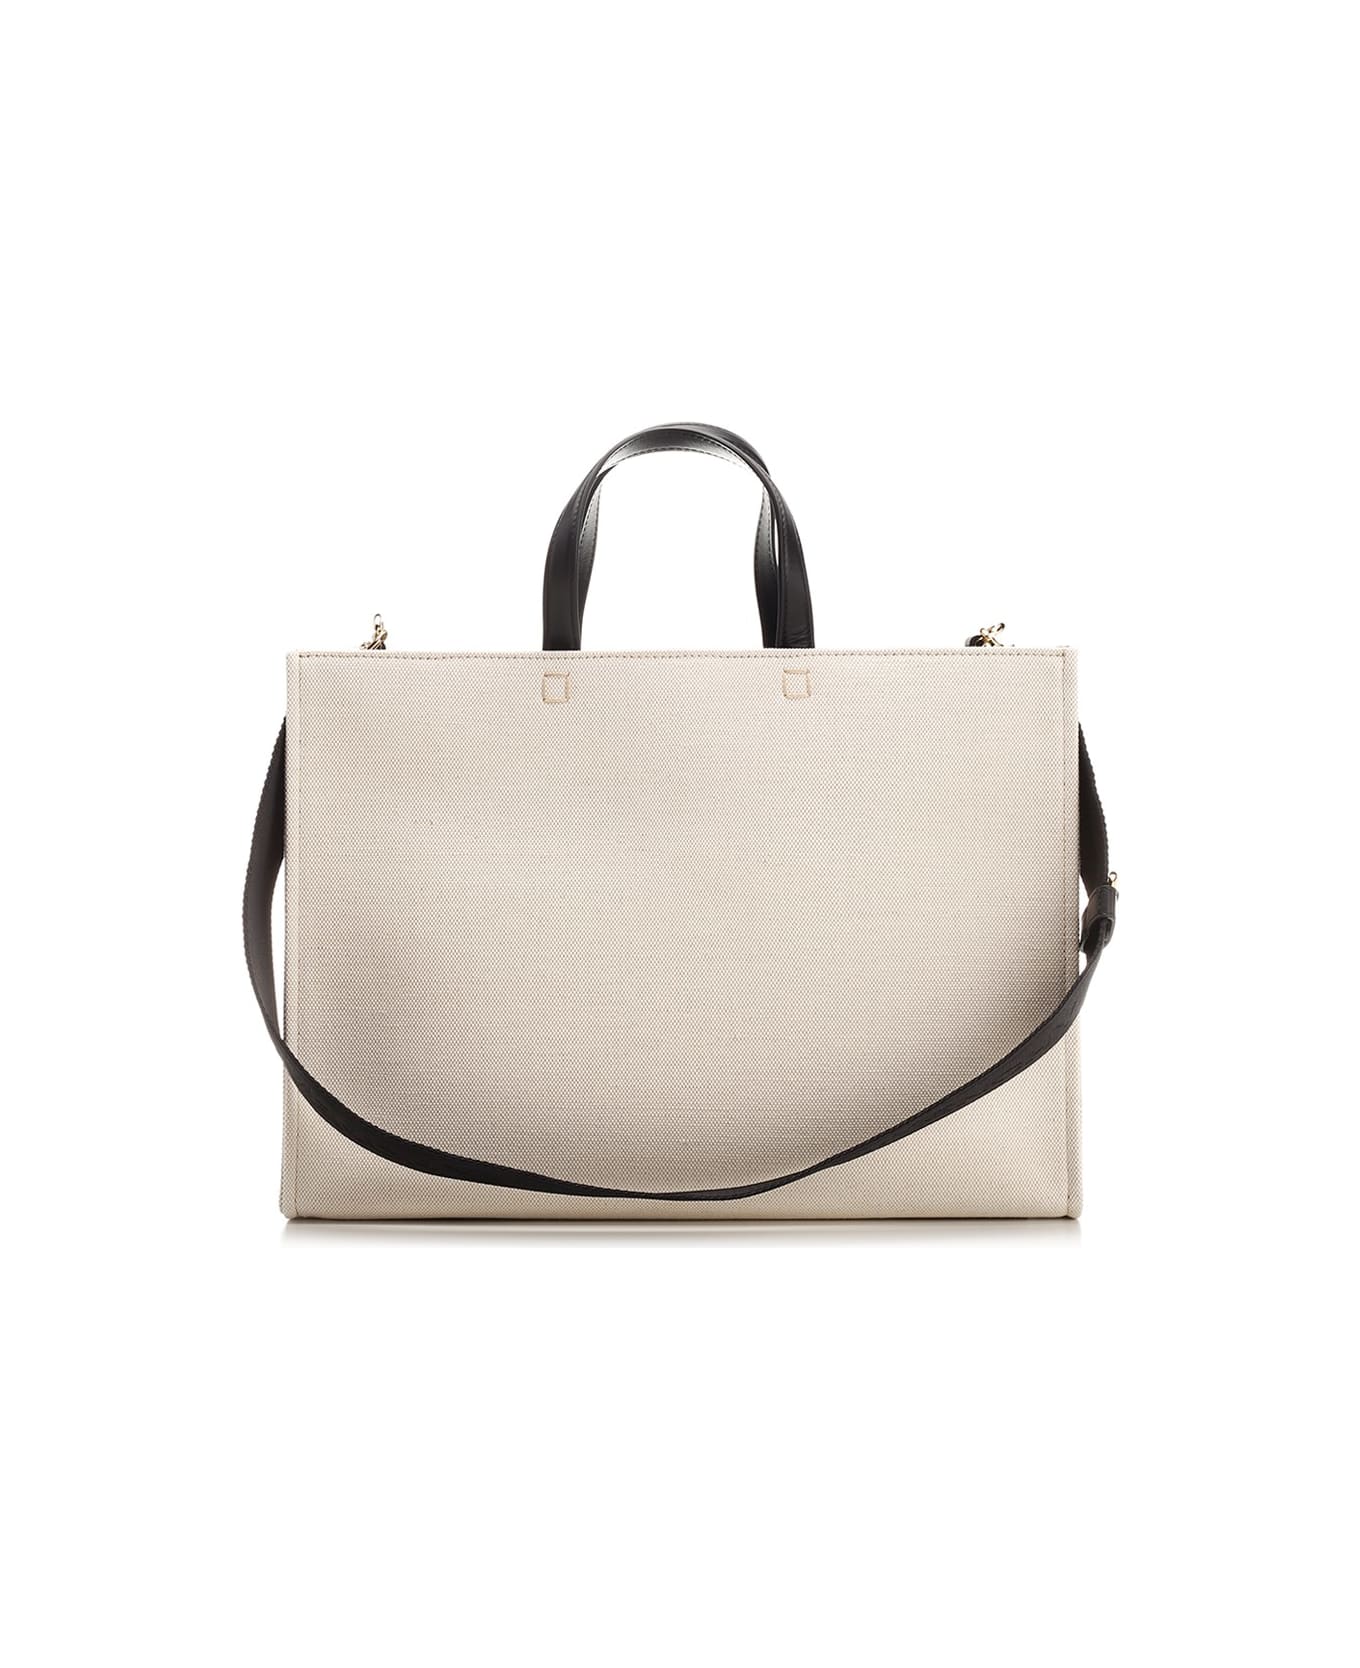 Givenchy 'g' Canvas Tote Bag - Beige トートバッグ